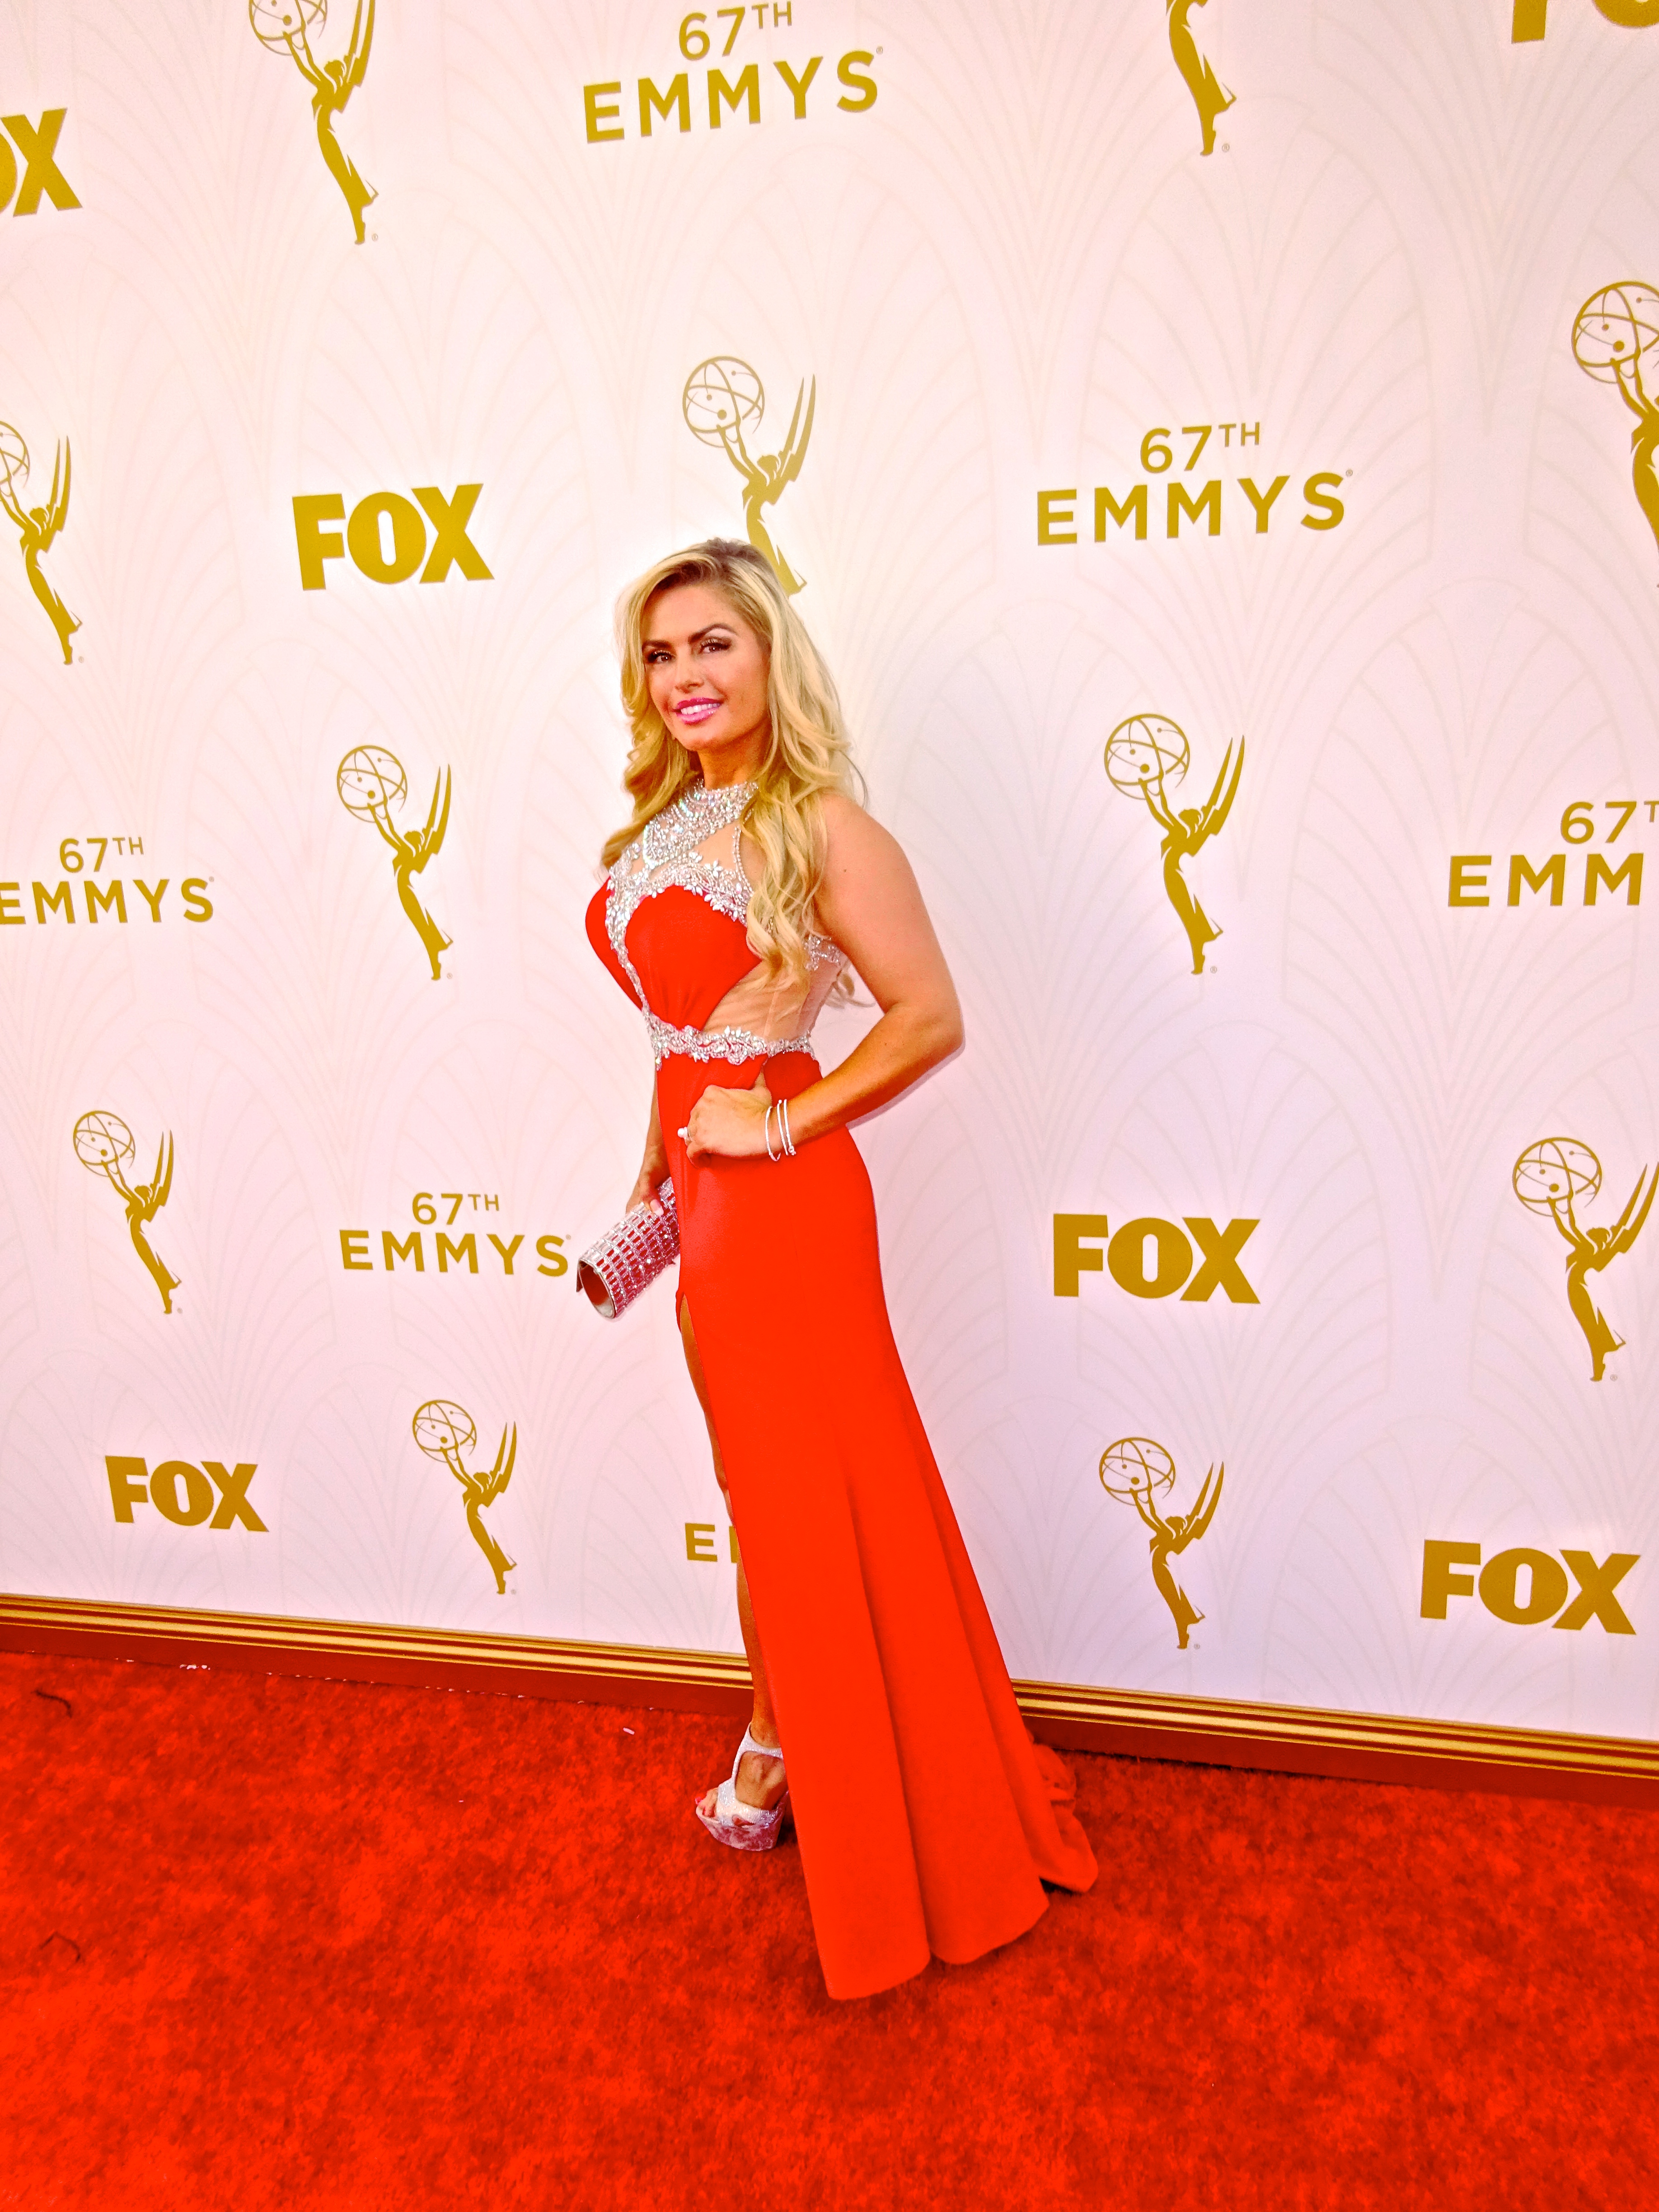 Tia Barr at the 67th Emmy Awards